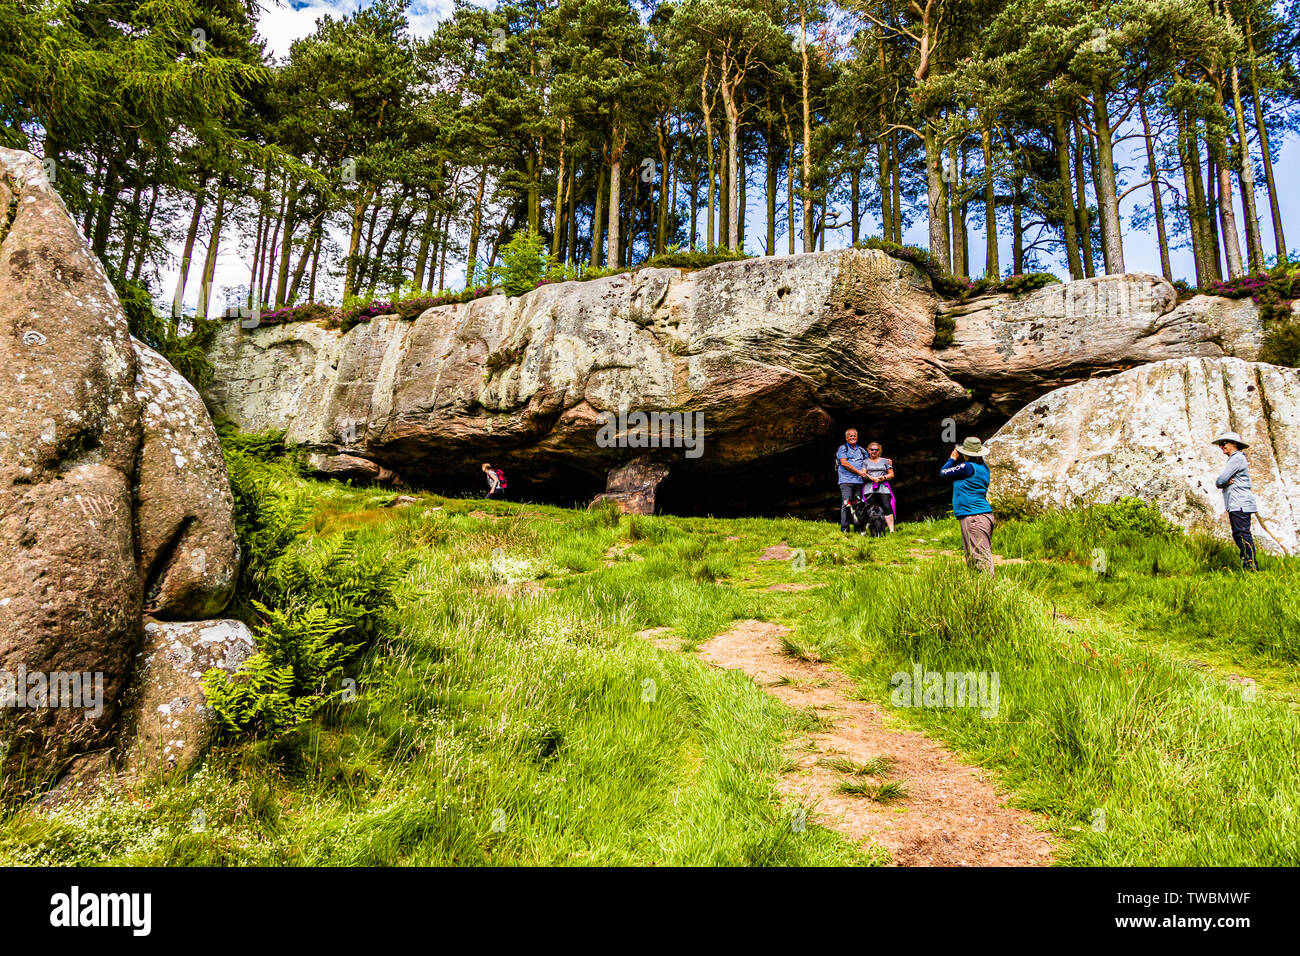 Holidaymakers and walkers enjoying St Cuthbert's Cave, a sandstone outcrop in Northumberland, UK. June 2019. Stock Photo